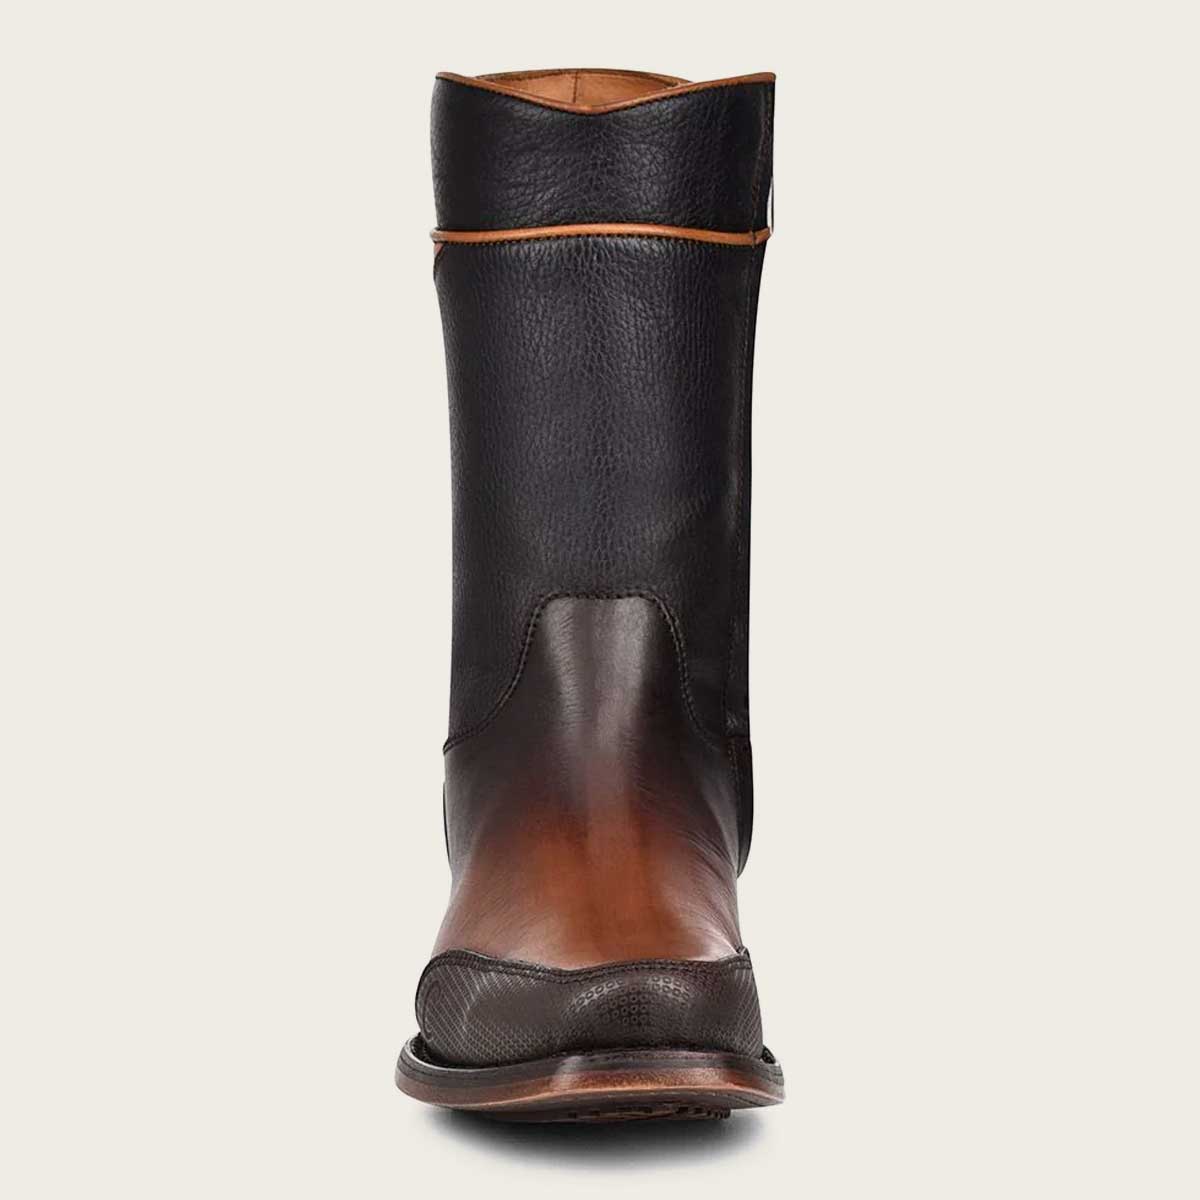 Stylish urban brown leather boot for men with laser-engraved geometric motifs and unique texture